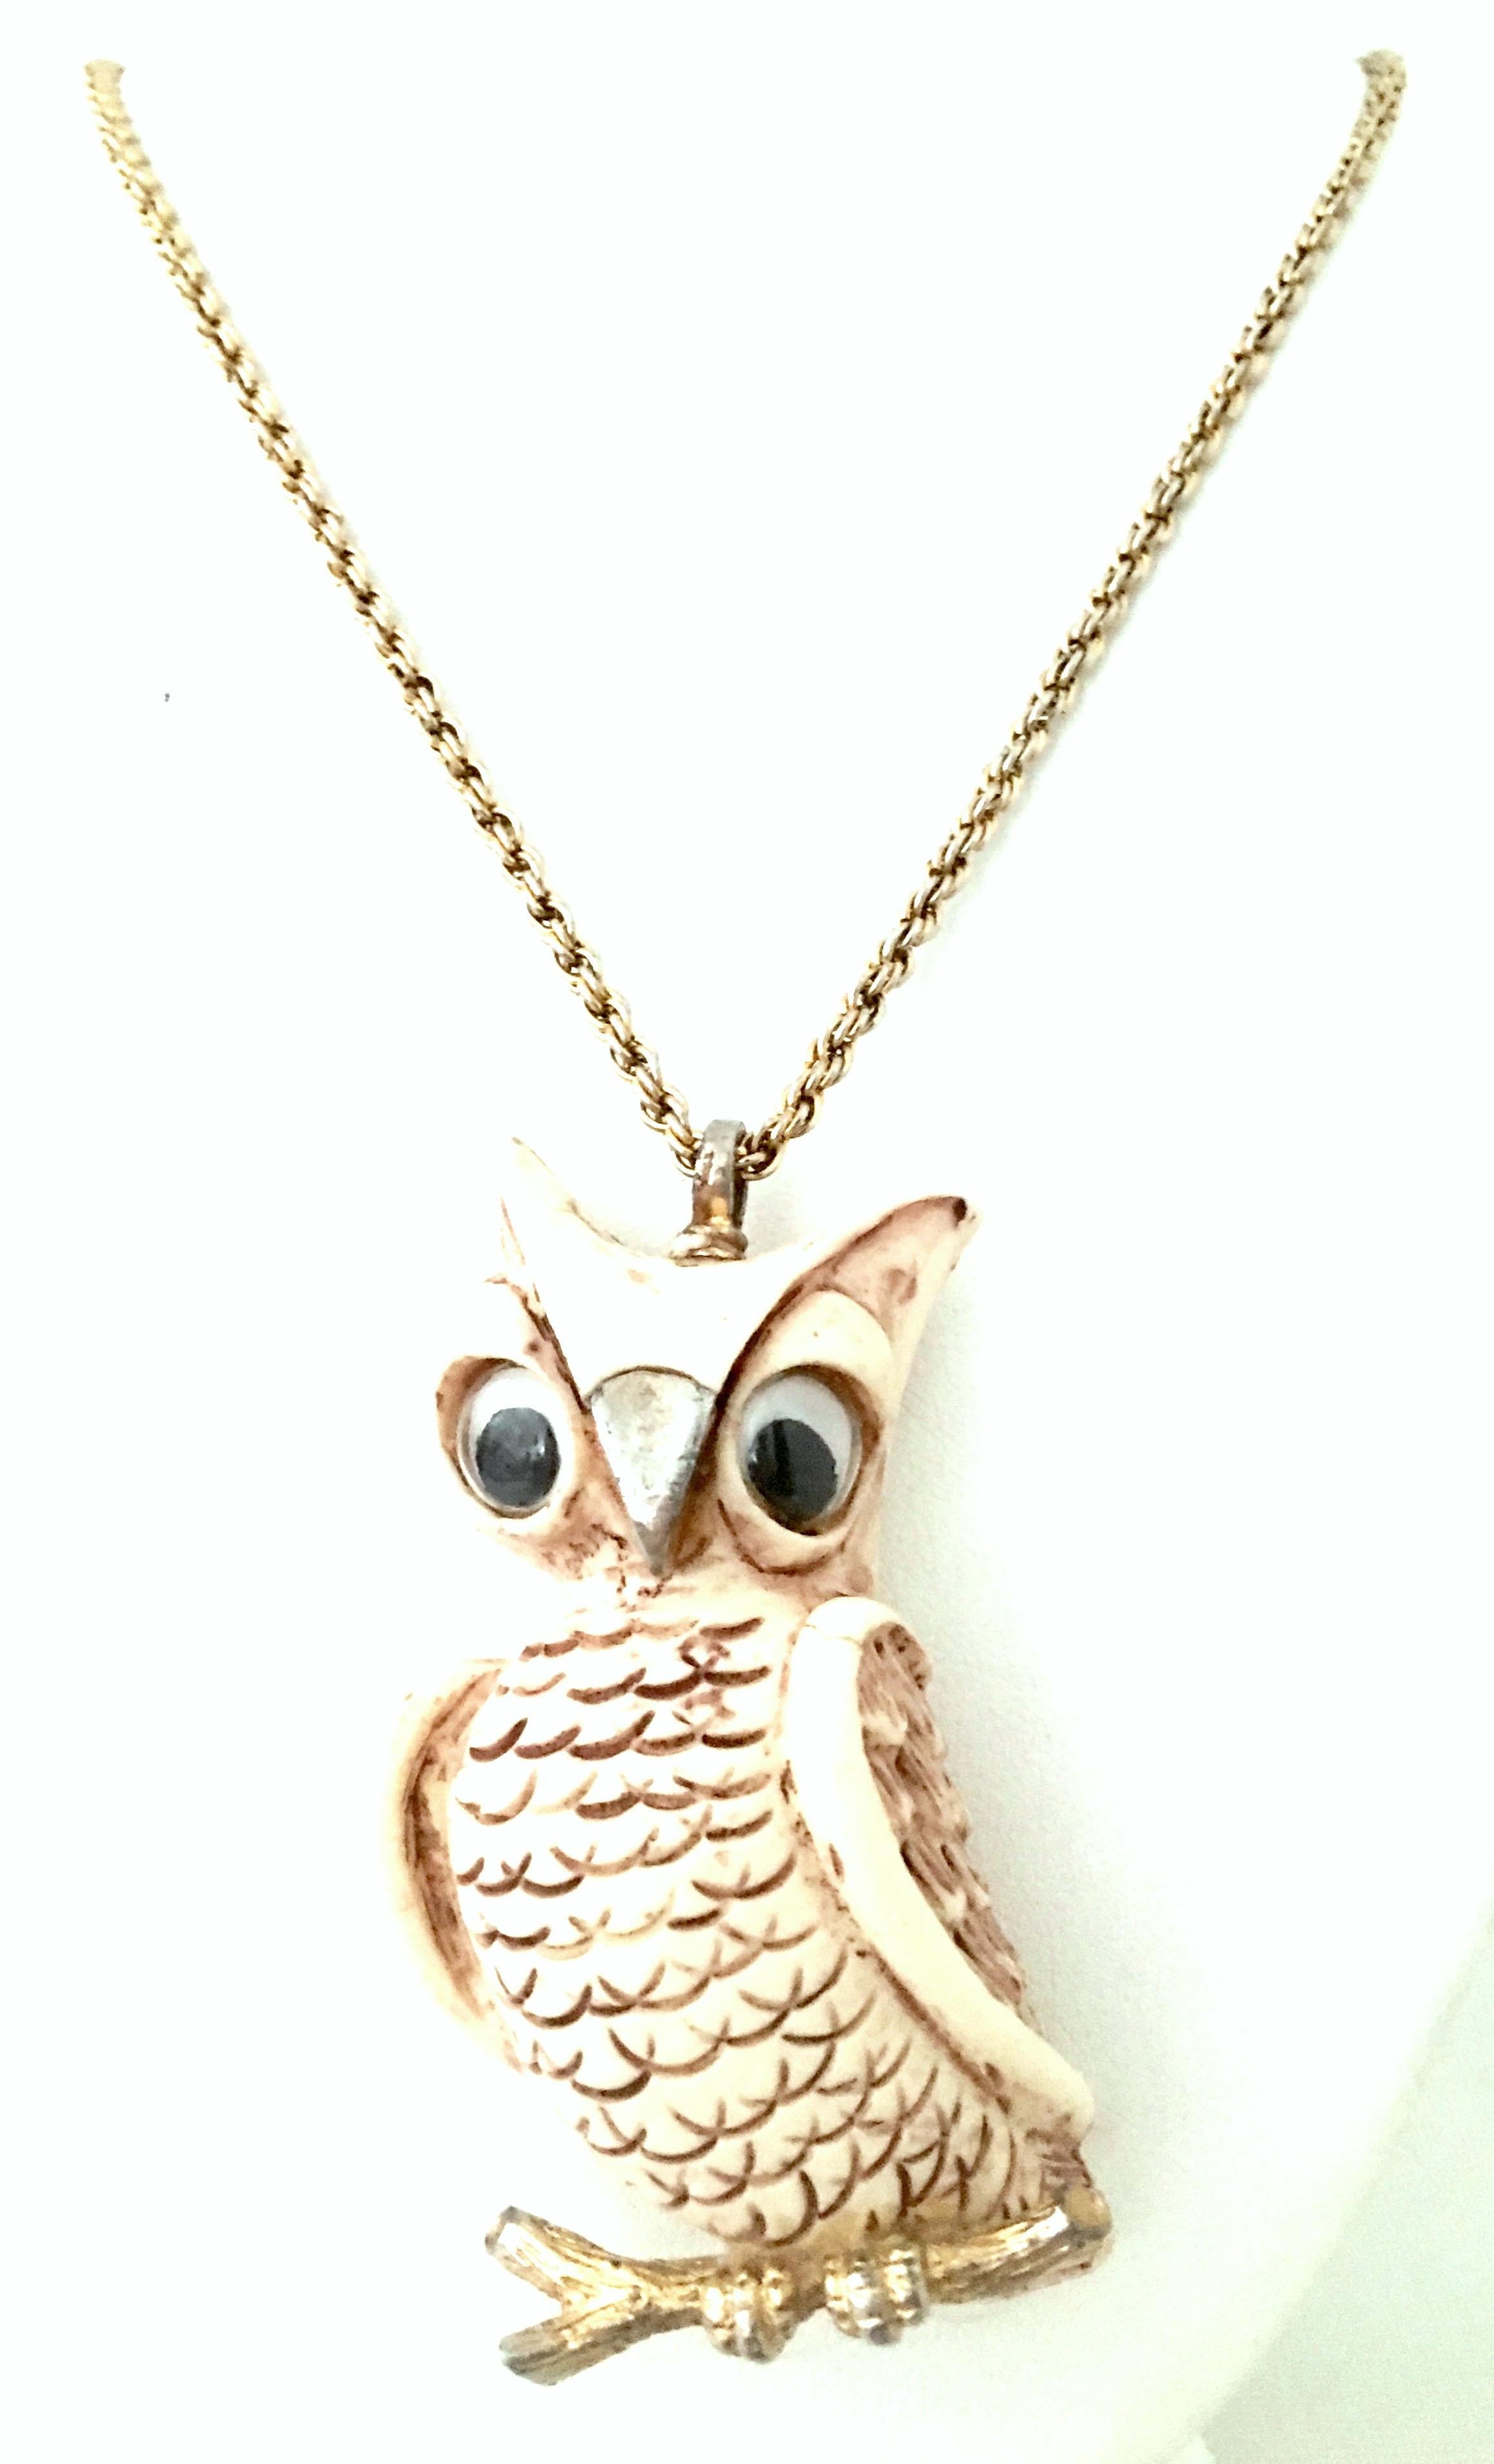 1970'S Gold & Resin Owl pendant Necklace By. Lucca Razza. The large own pendant is sculpted from resin composite with plastic eyes and gold plate in the beak, bale and lower faux bois branch. This rare and coveted piece Includes a 36.5